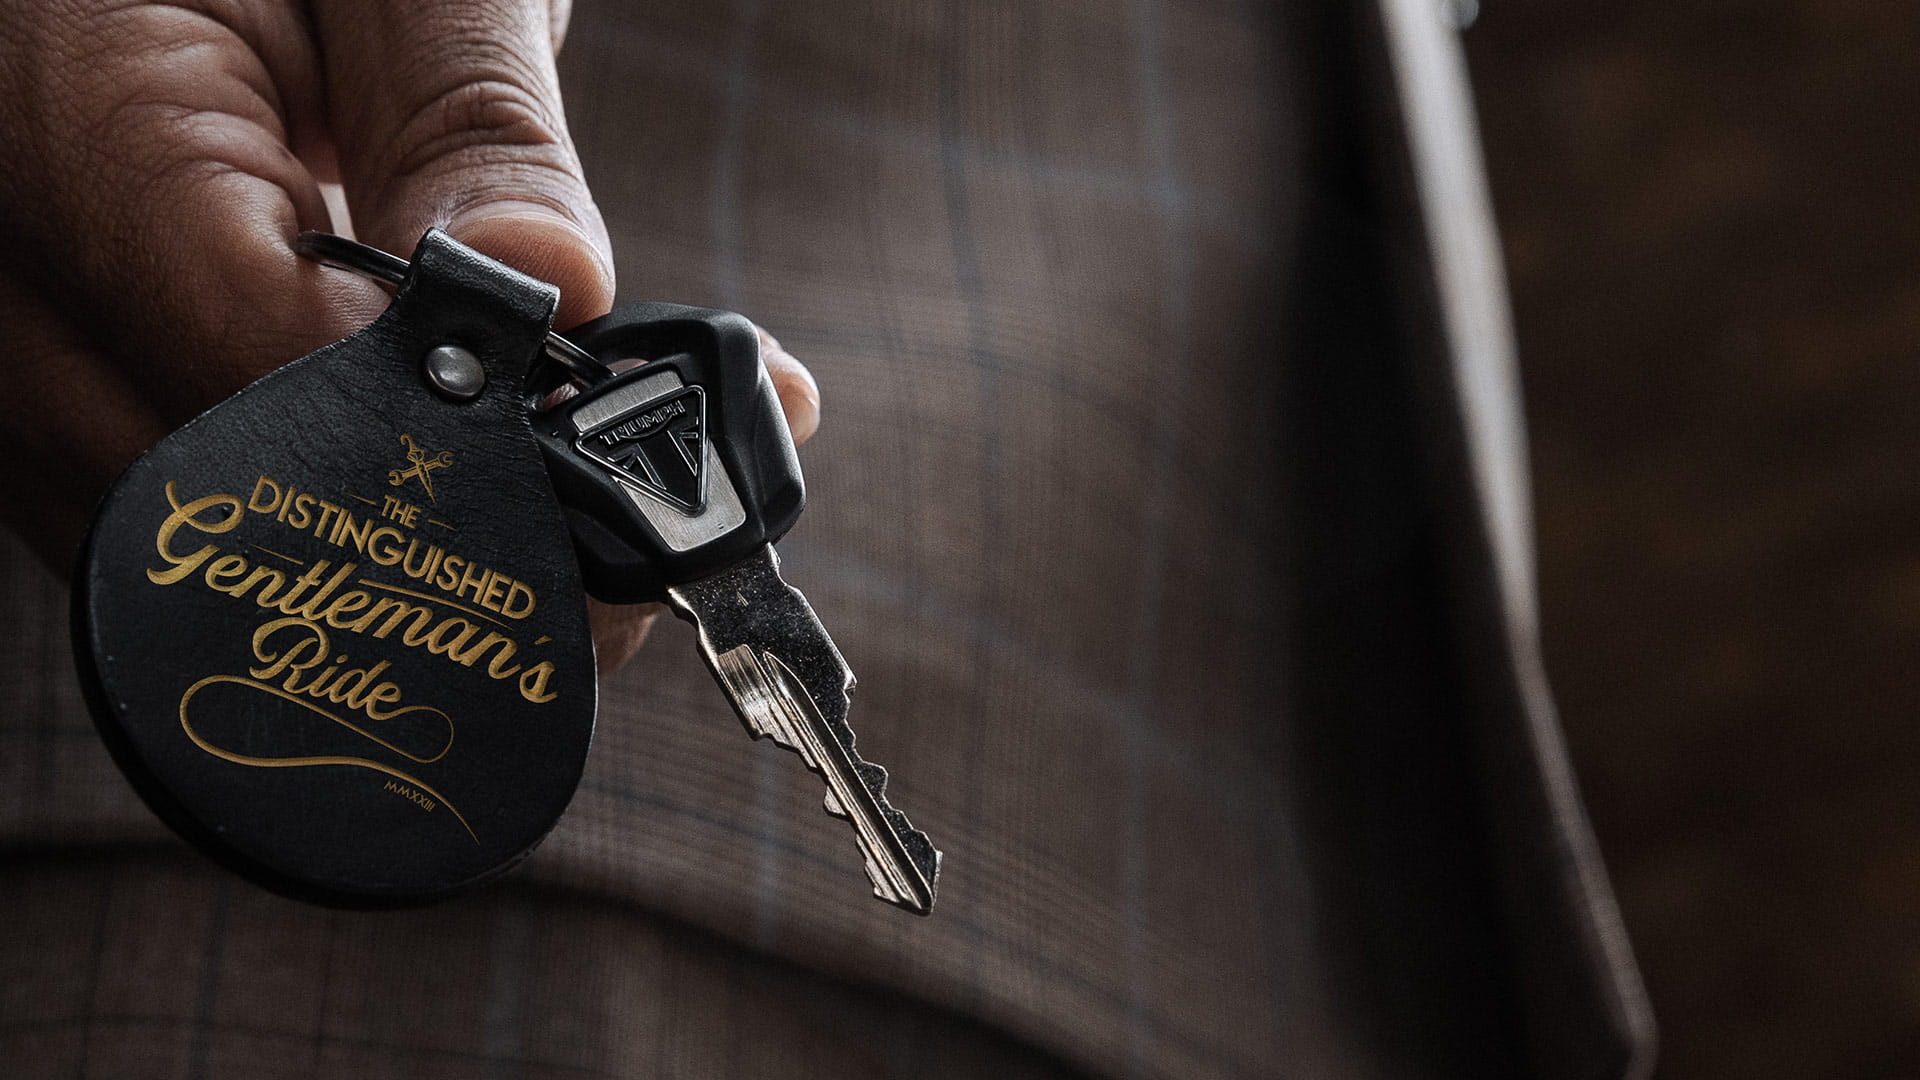 Triumph Key with The Distinguished Gentleman's Ride keyring